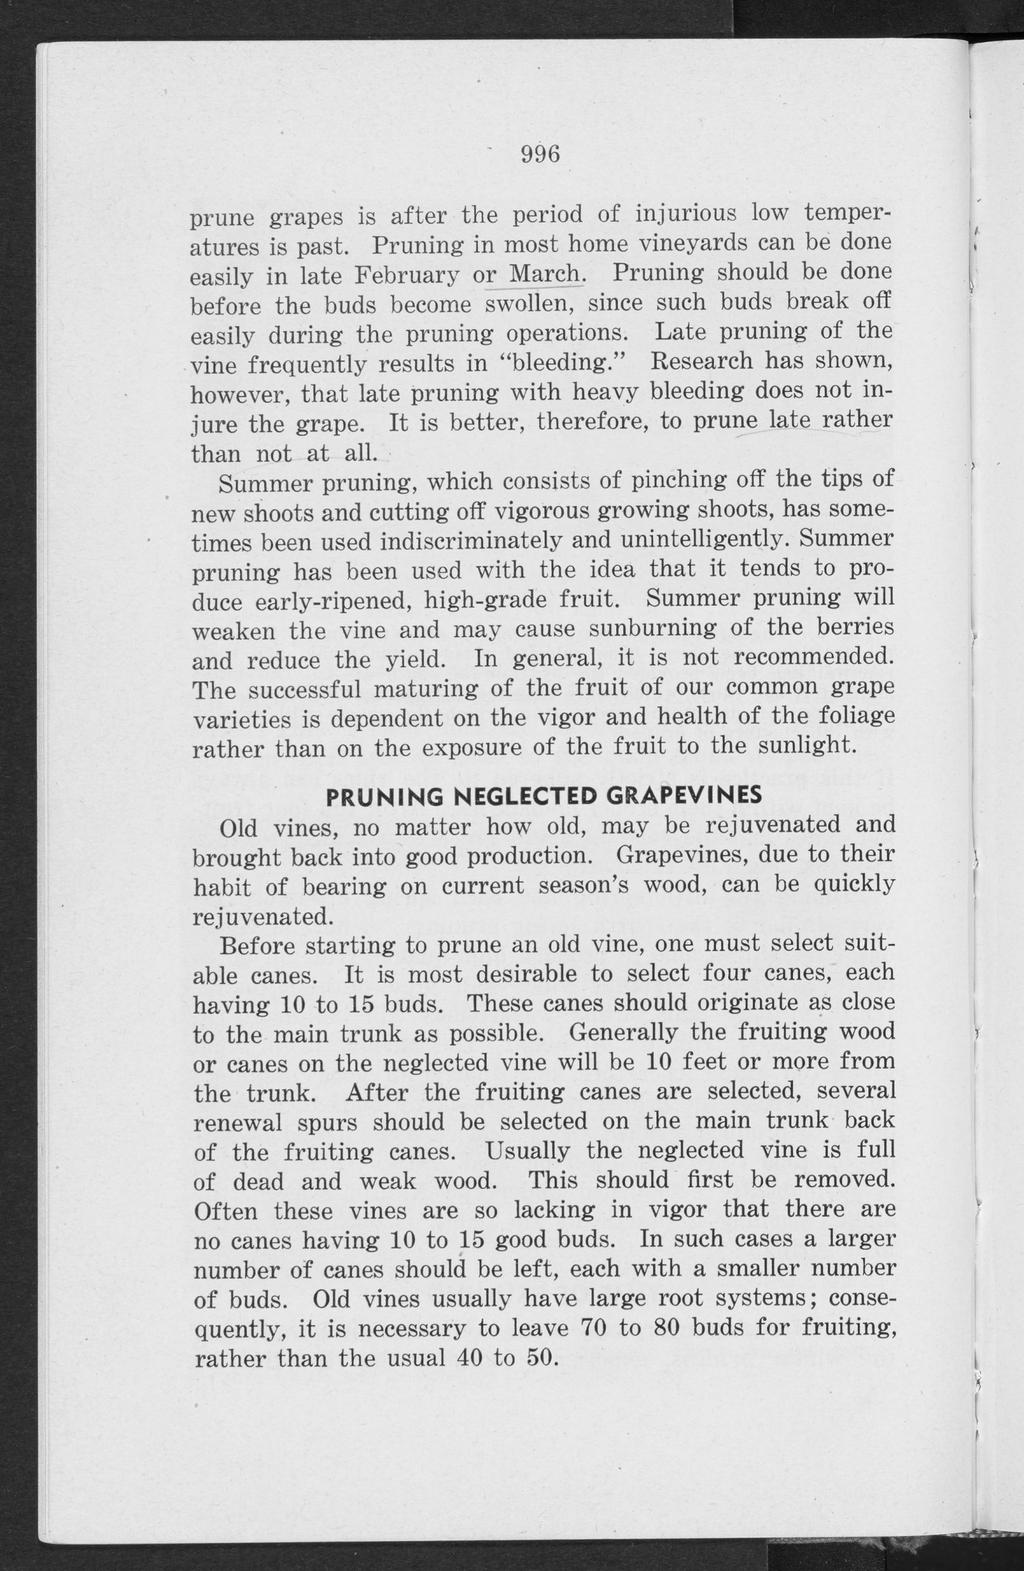 Bulletin P, Vol. 4, No. 90 [1948], Art. 1 996 prune grapes is after the period of injurious low temperatures is past. Pruning in most home vineyards can be done easily in late February or March.